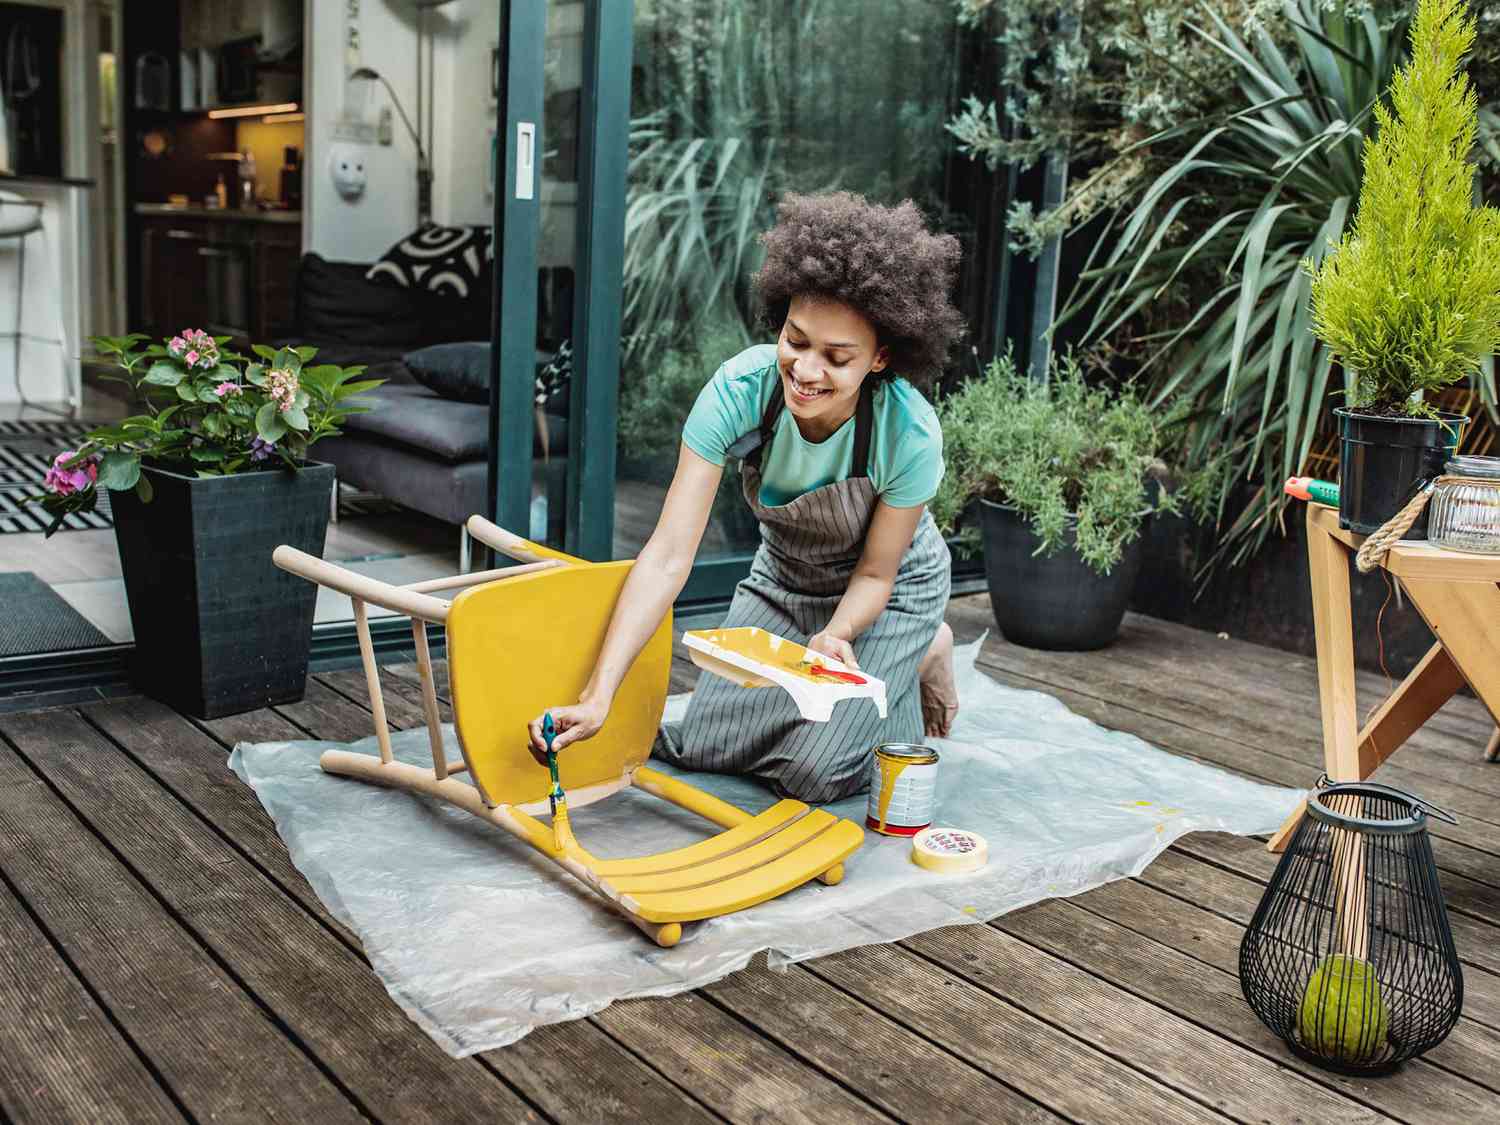 Woman is painting a chair at home